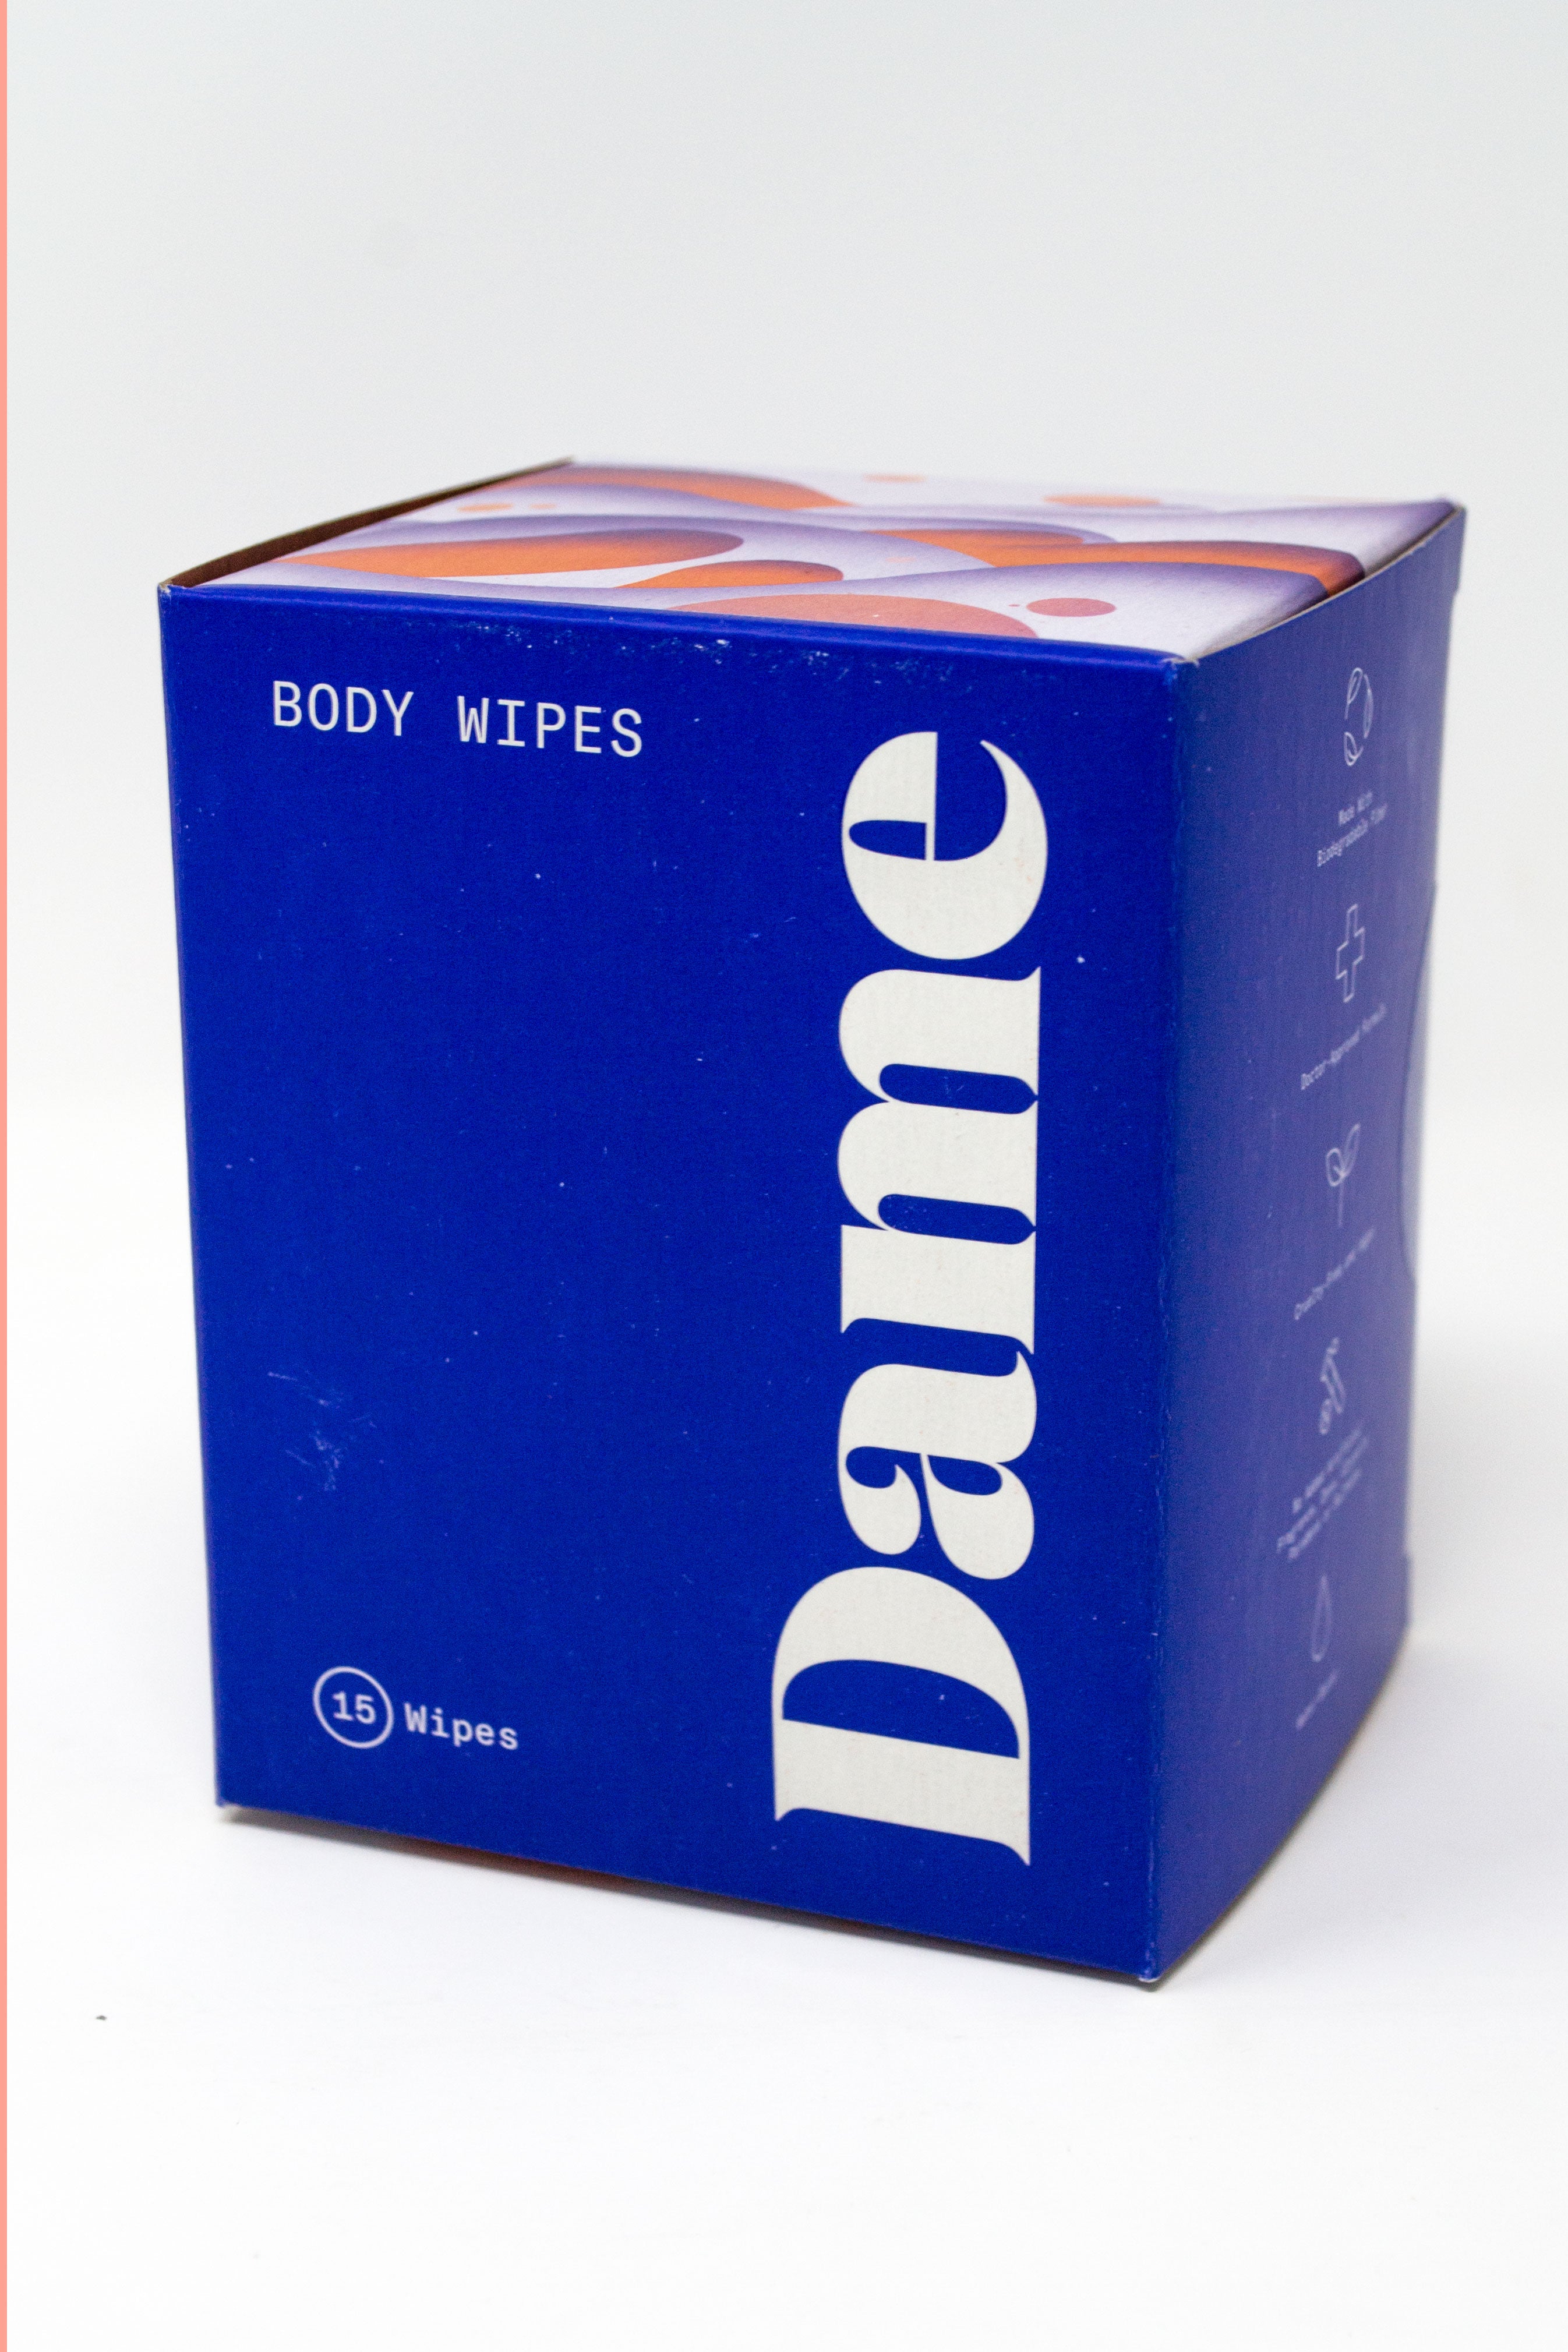 Dame Body Wipes Sachets 15 Count-Accessories / Miscellaneous-Dame-XOXTOYS